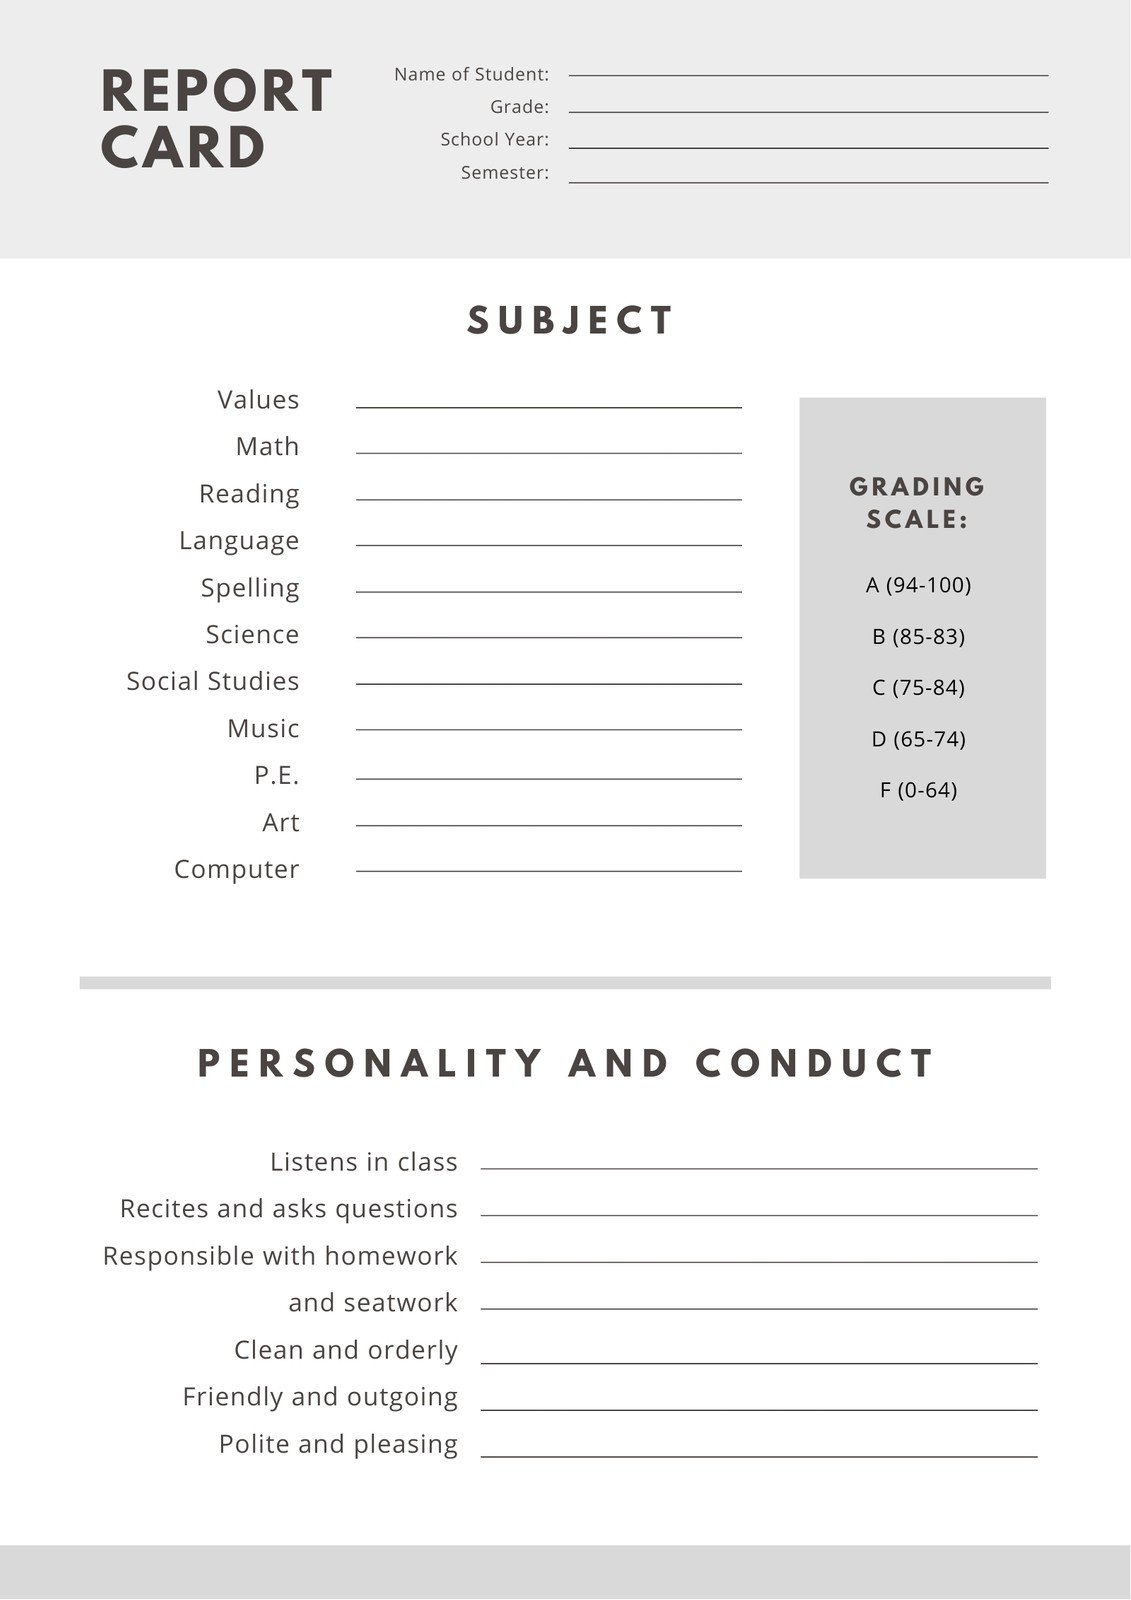 Free, printable, customizable report card templates  Canva With Blank Report Card Template